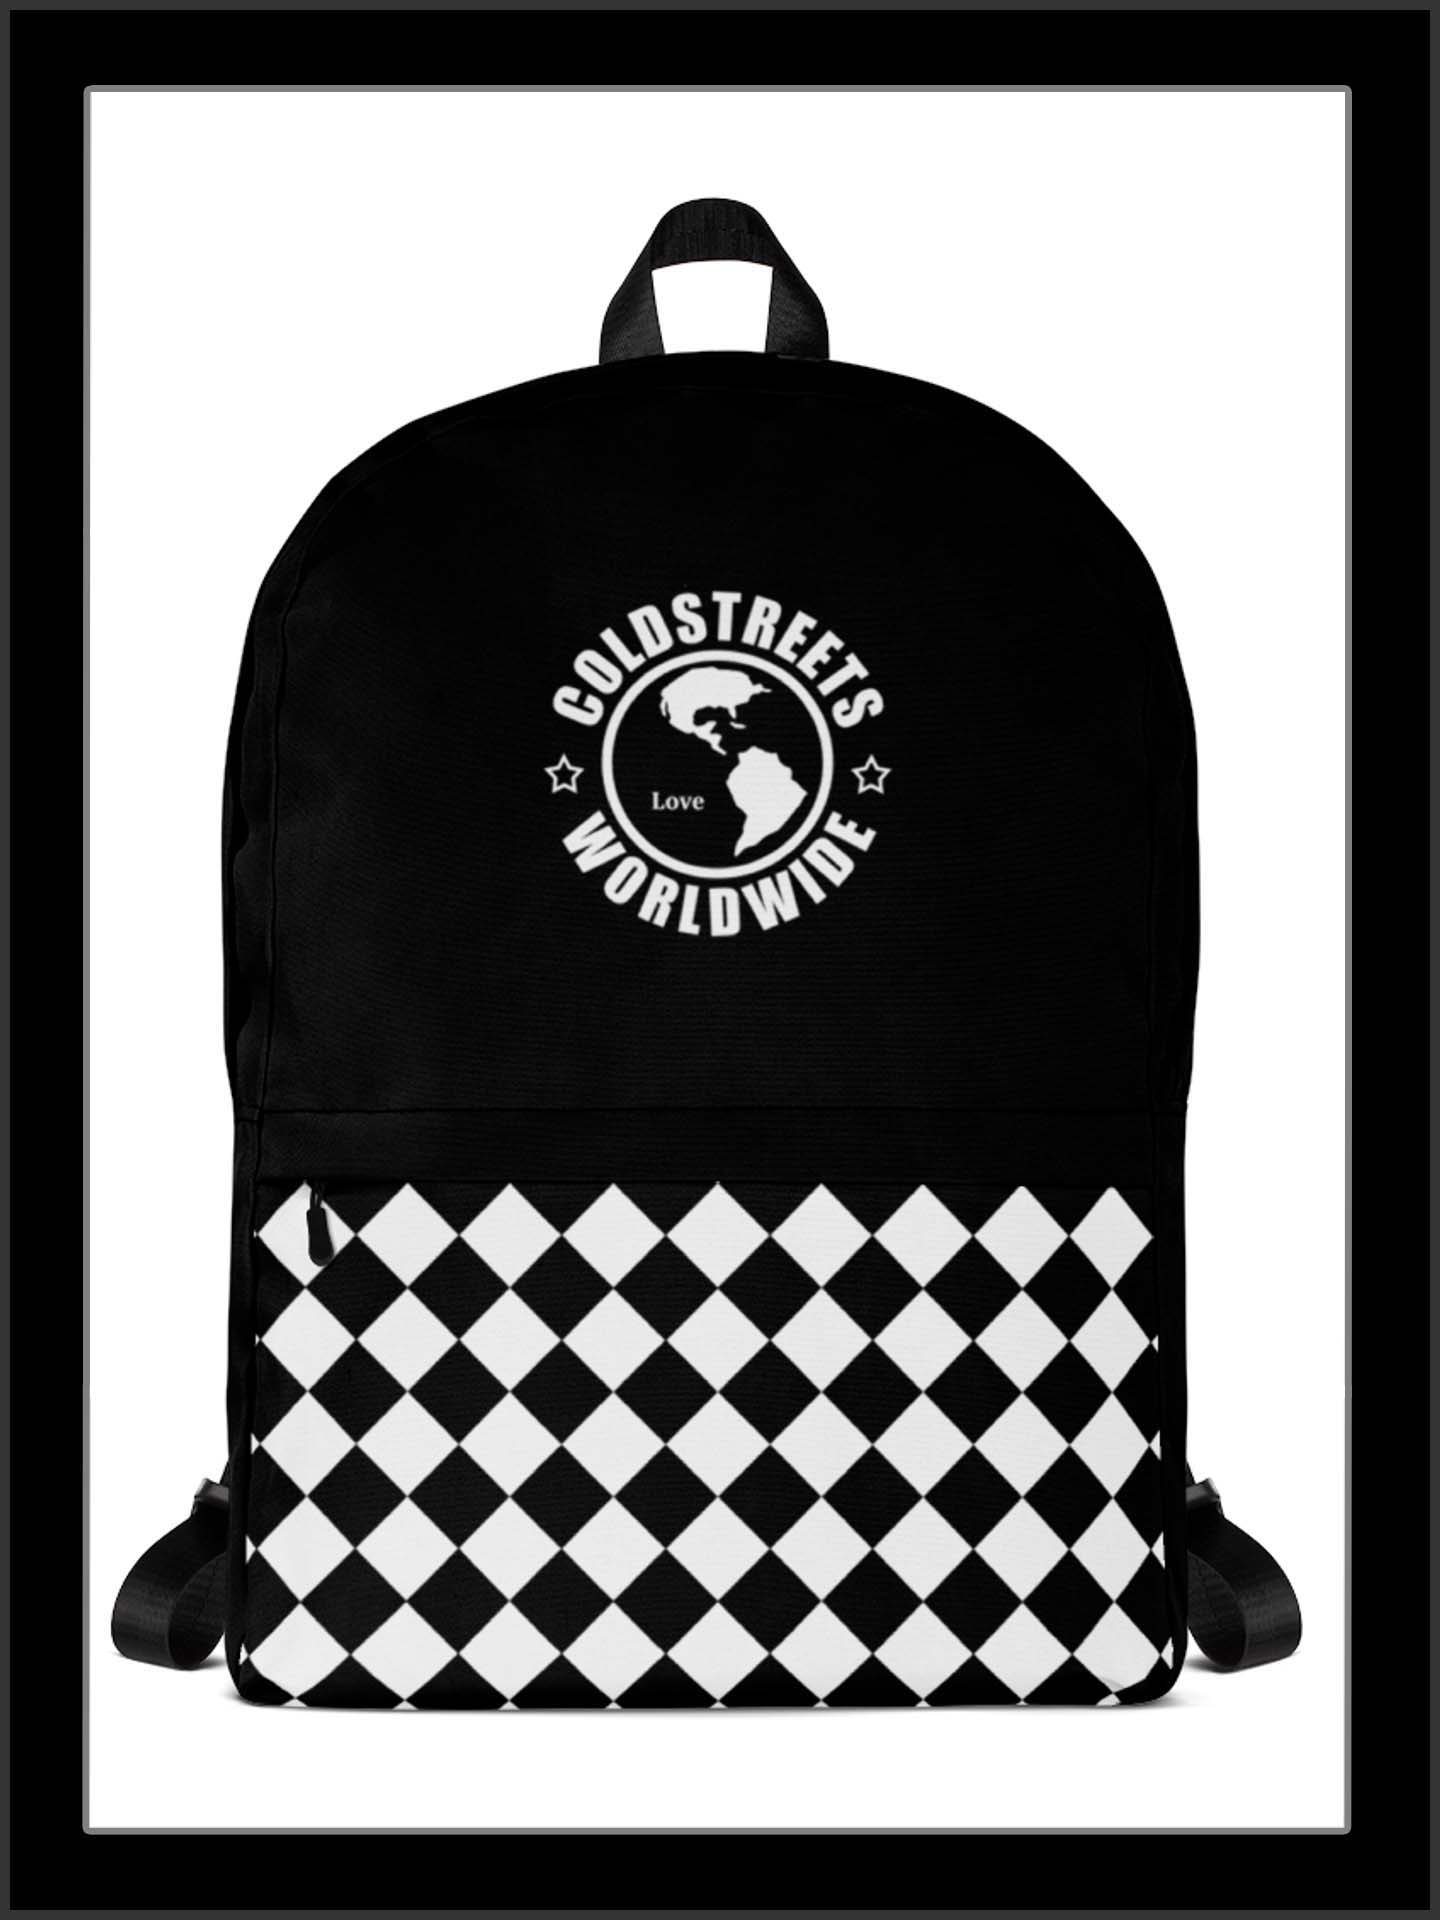 Cold Streets New Jersey Backpacks